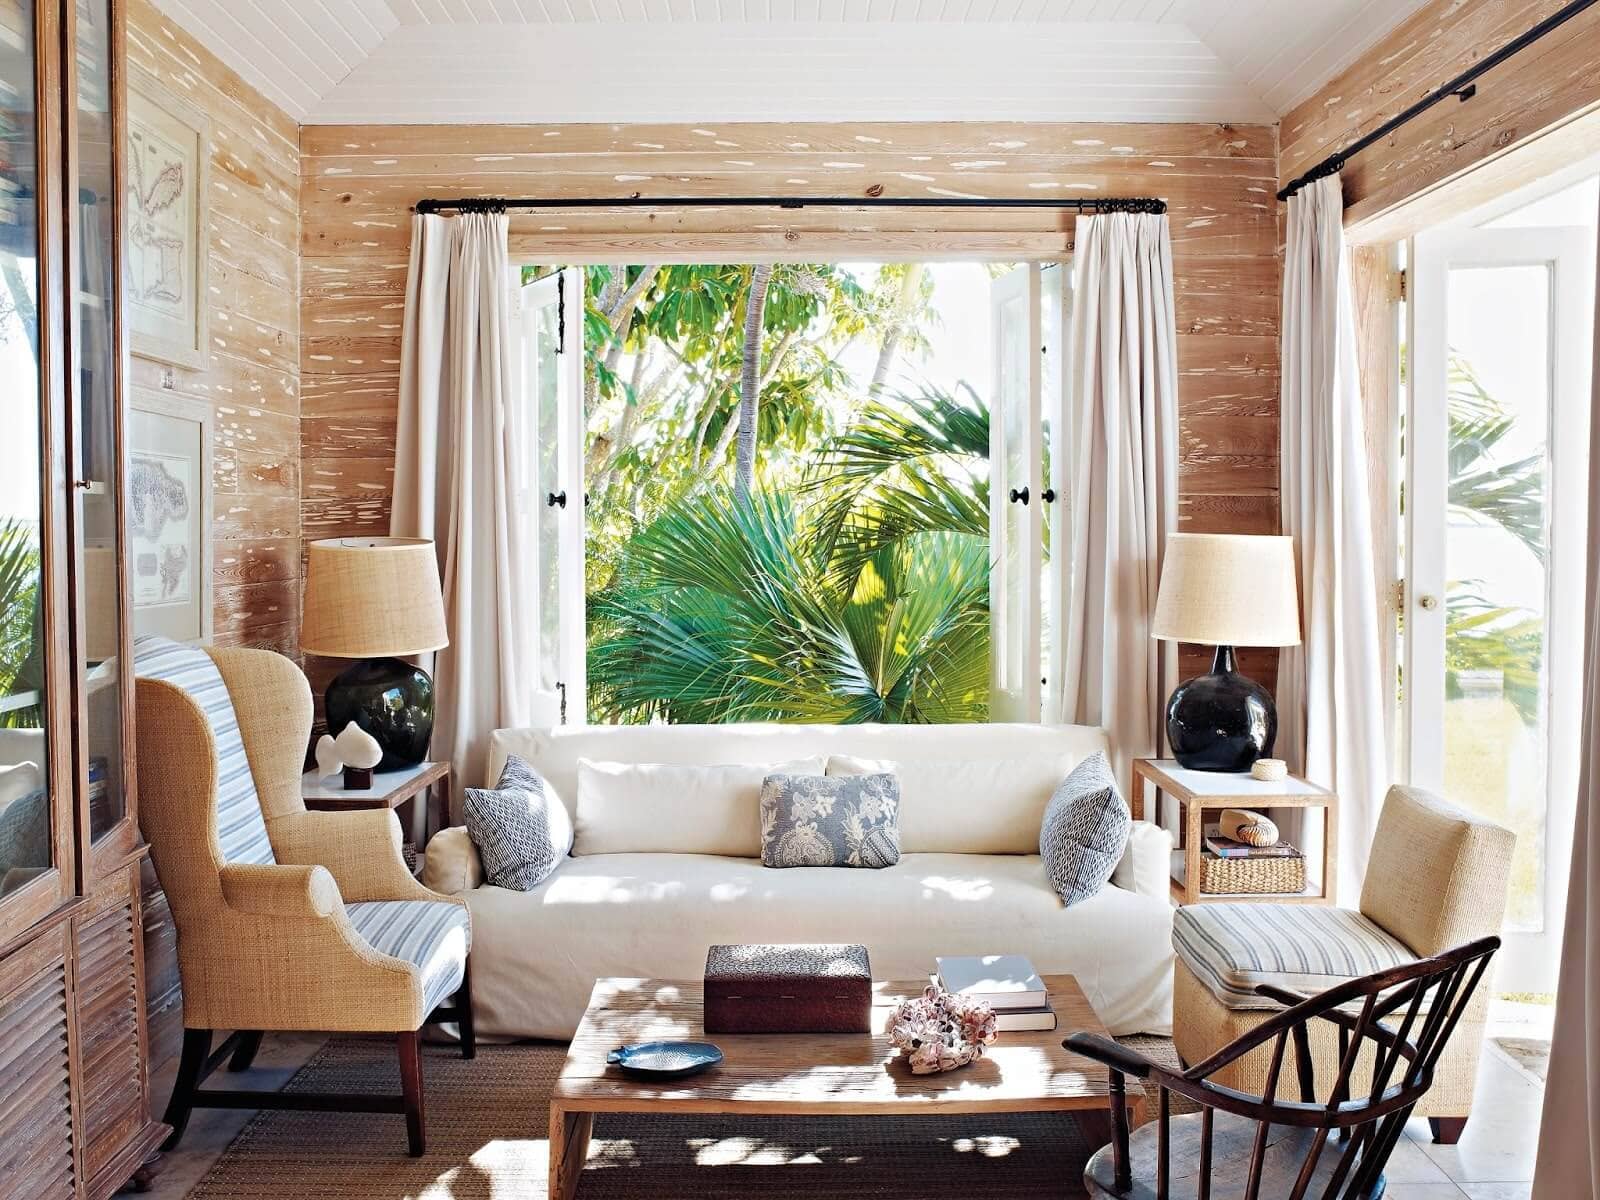 Stunning tropical style decorating ideas for this summer - 67